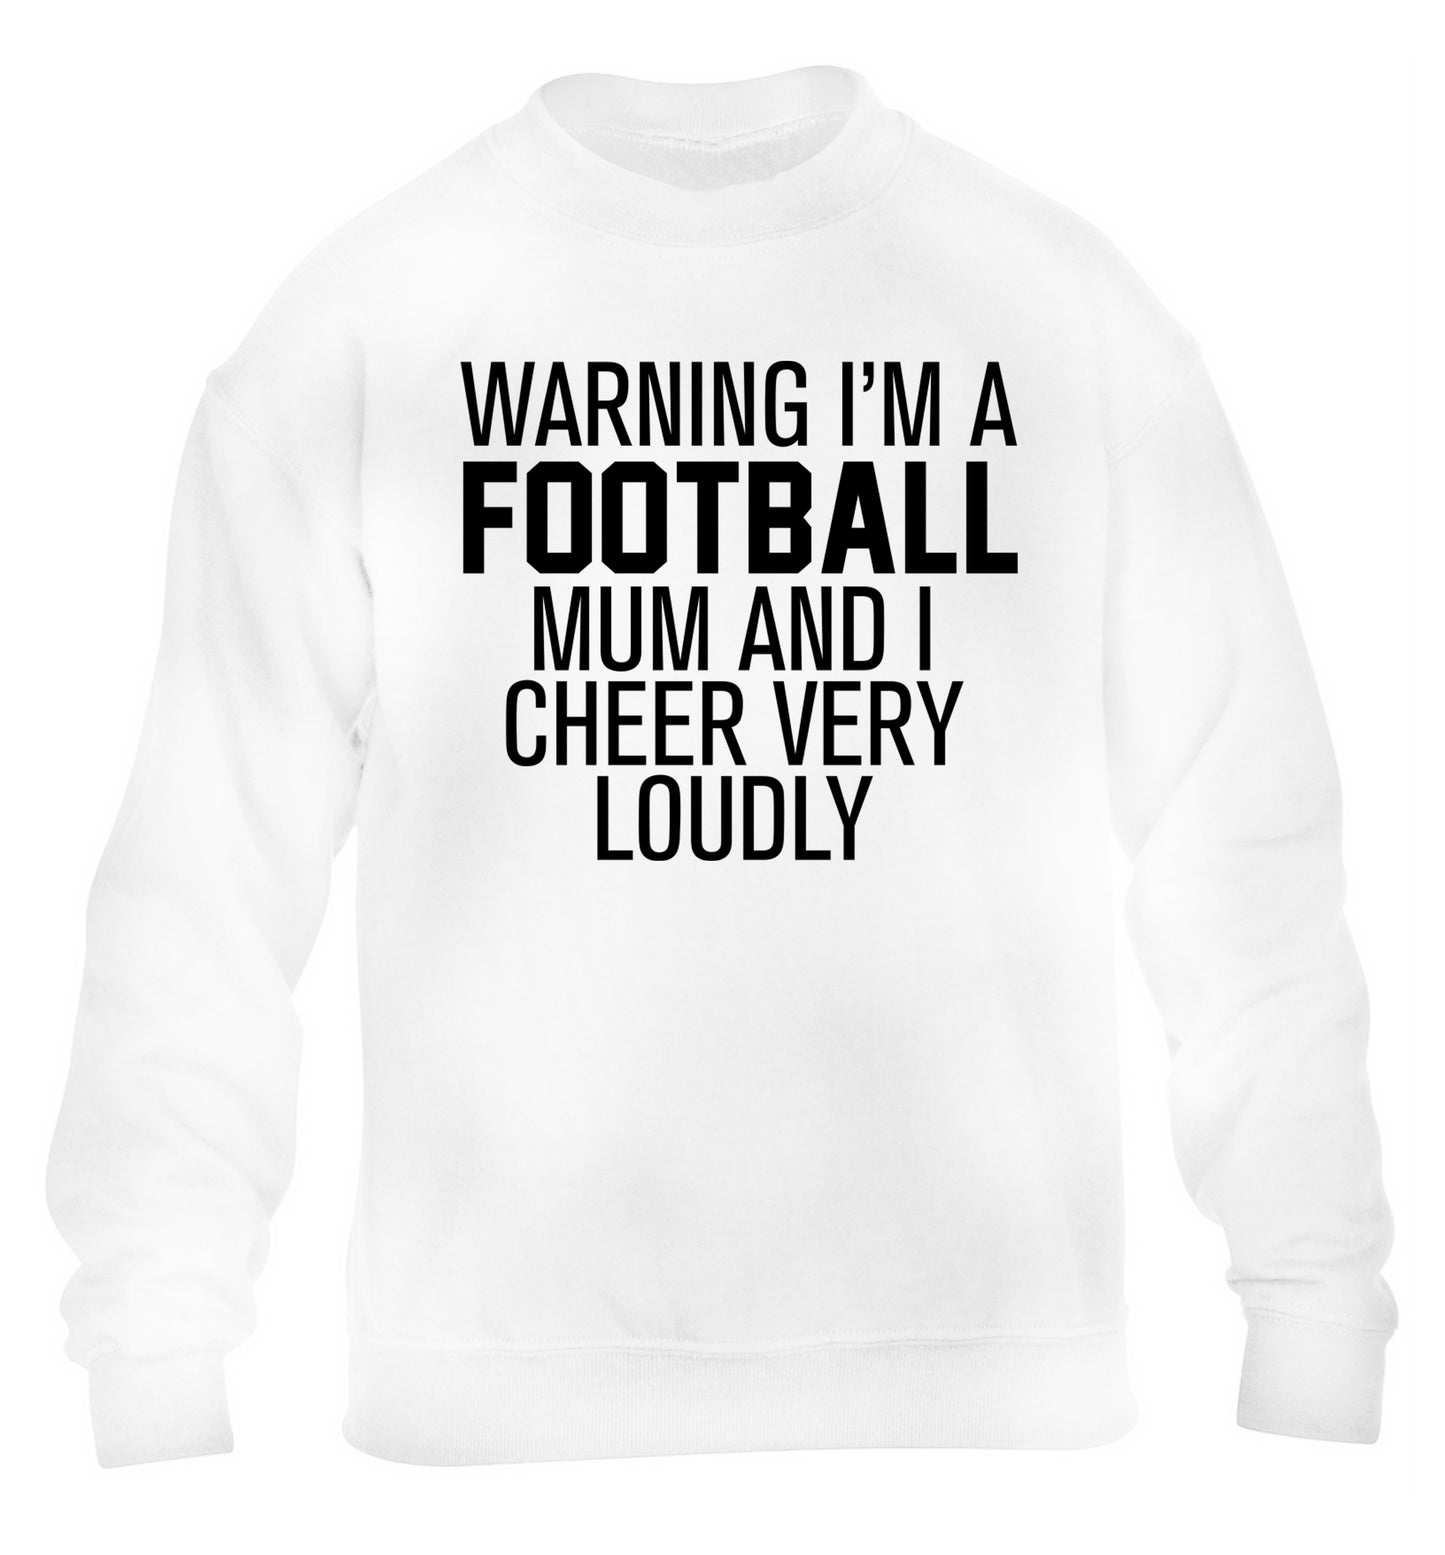 Warning I'm a football mum and I cheer very loudly children's white sweater 12-14 Years